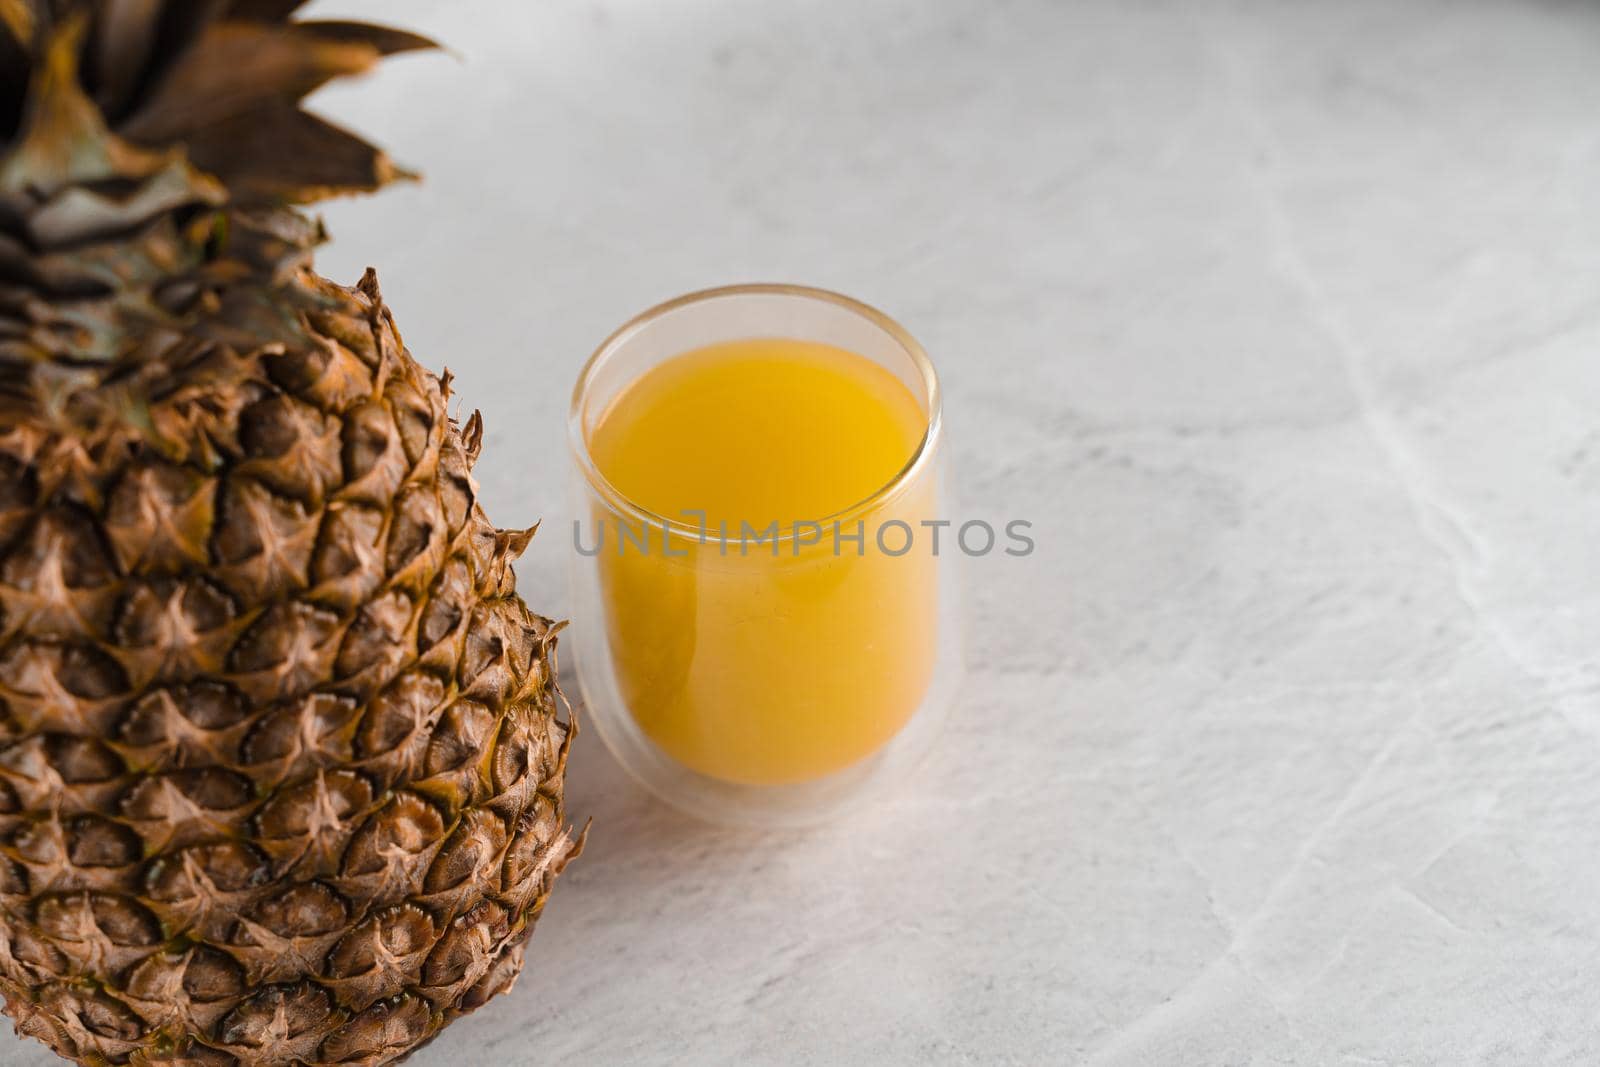 Pineapple fruit and juice in double glass cup on white stone background. Pouring yellow tropical fruit juice into glass. by Rabizo